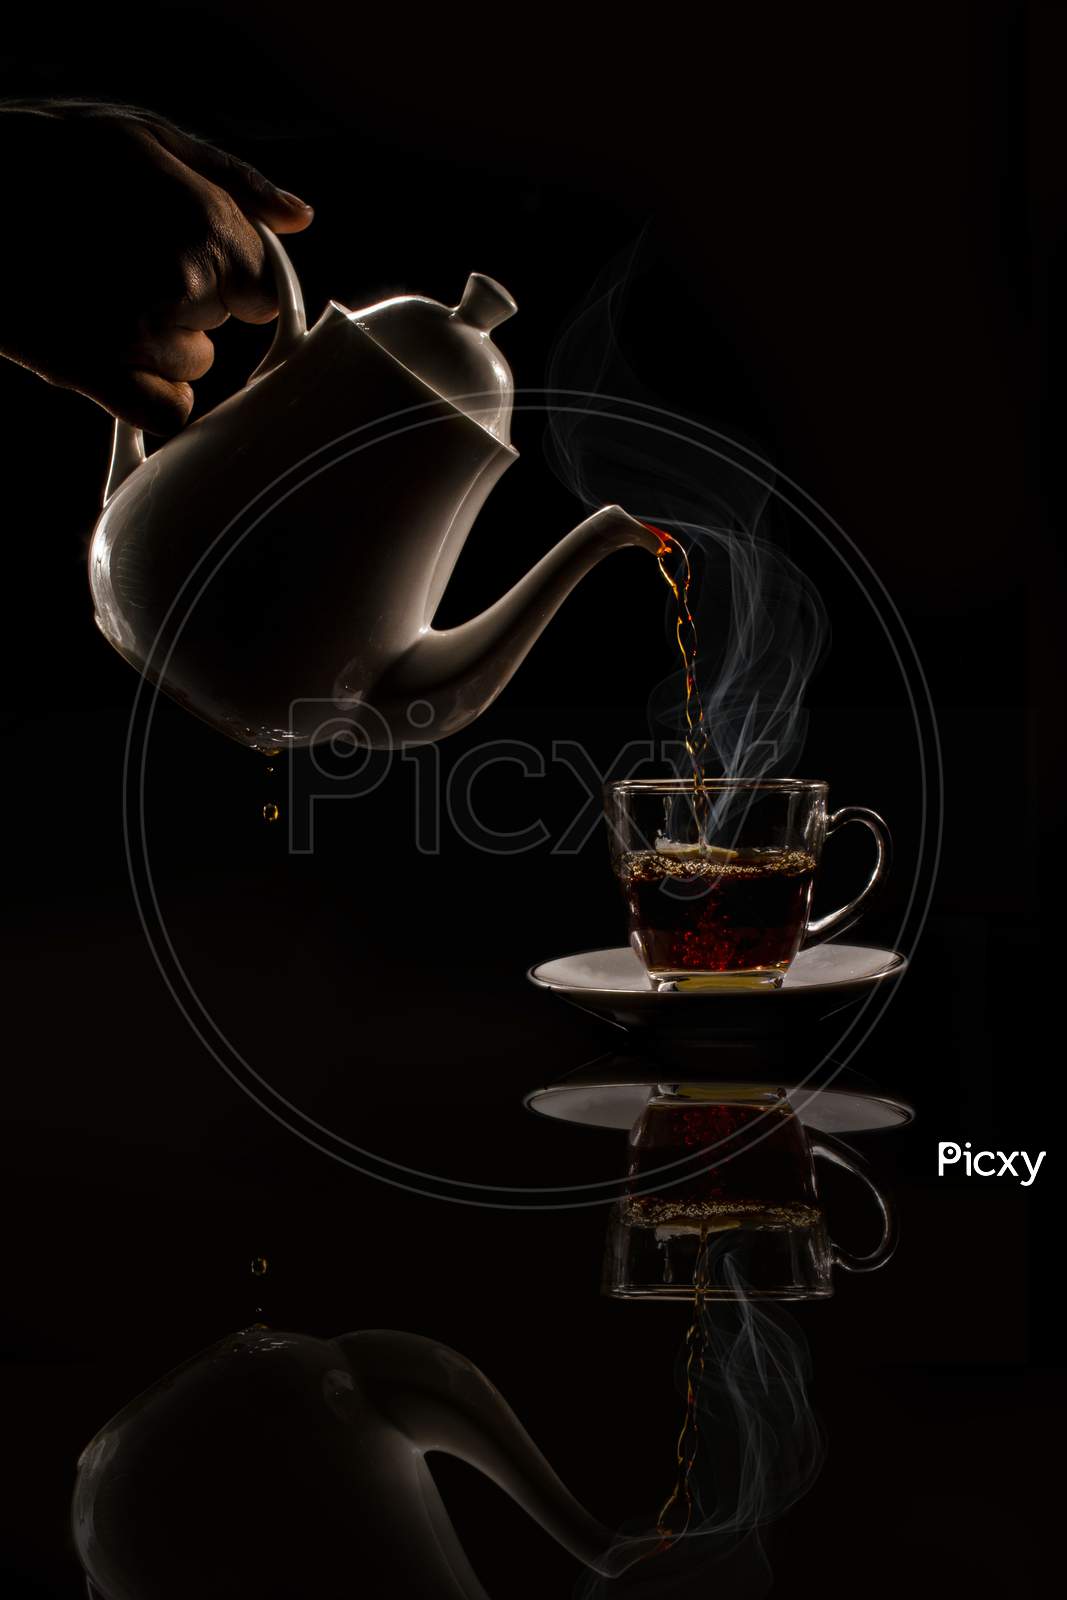 Pouring Black Hot Tea Into The Cup Stock Photo.On Black Background.